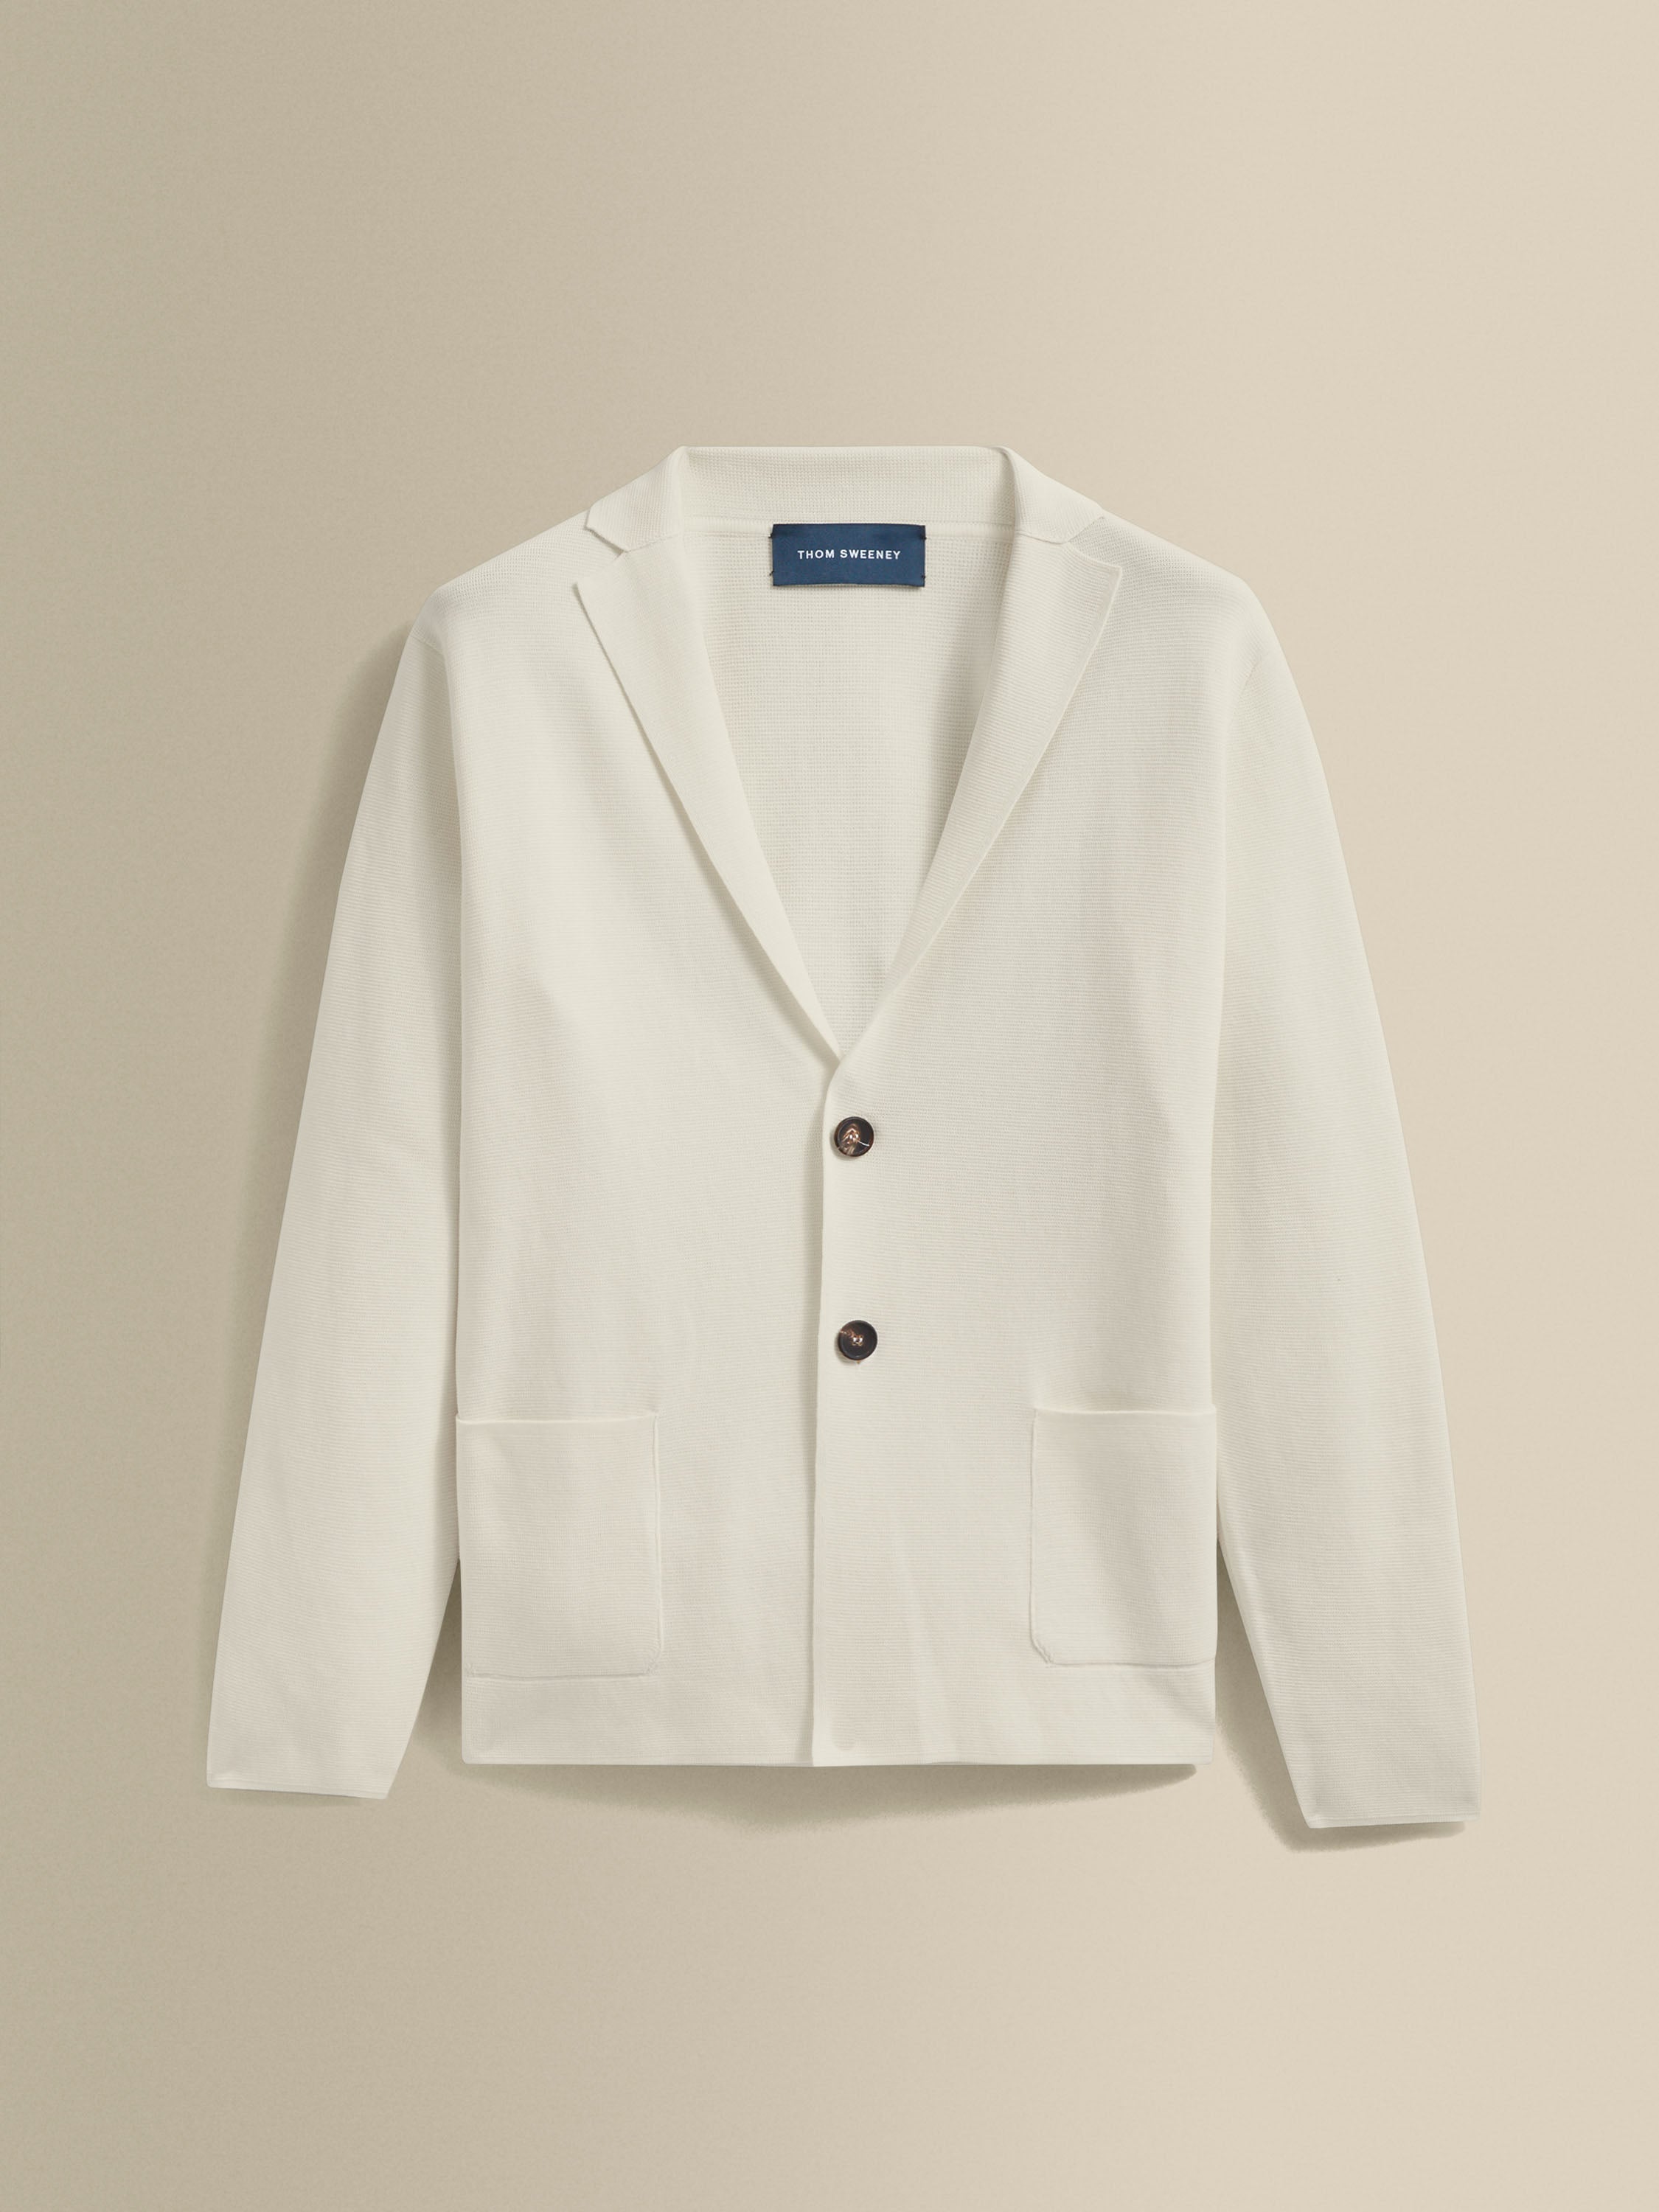 Crepe Cotton Single Breasted Knitted Jacket Off White Product Image